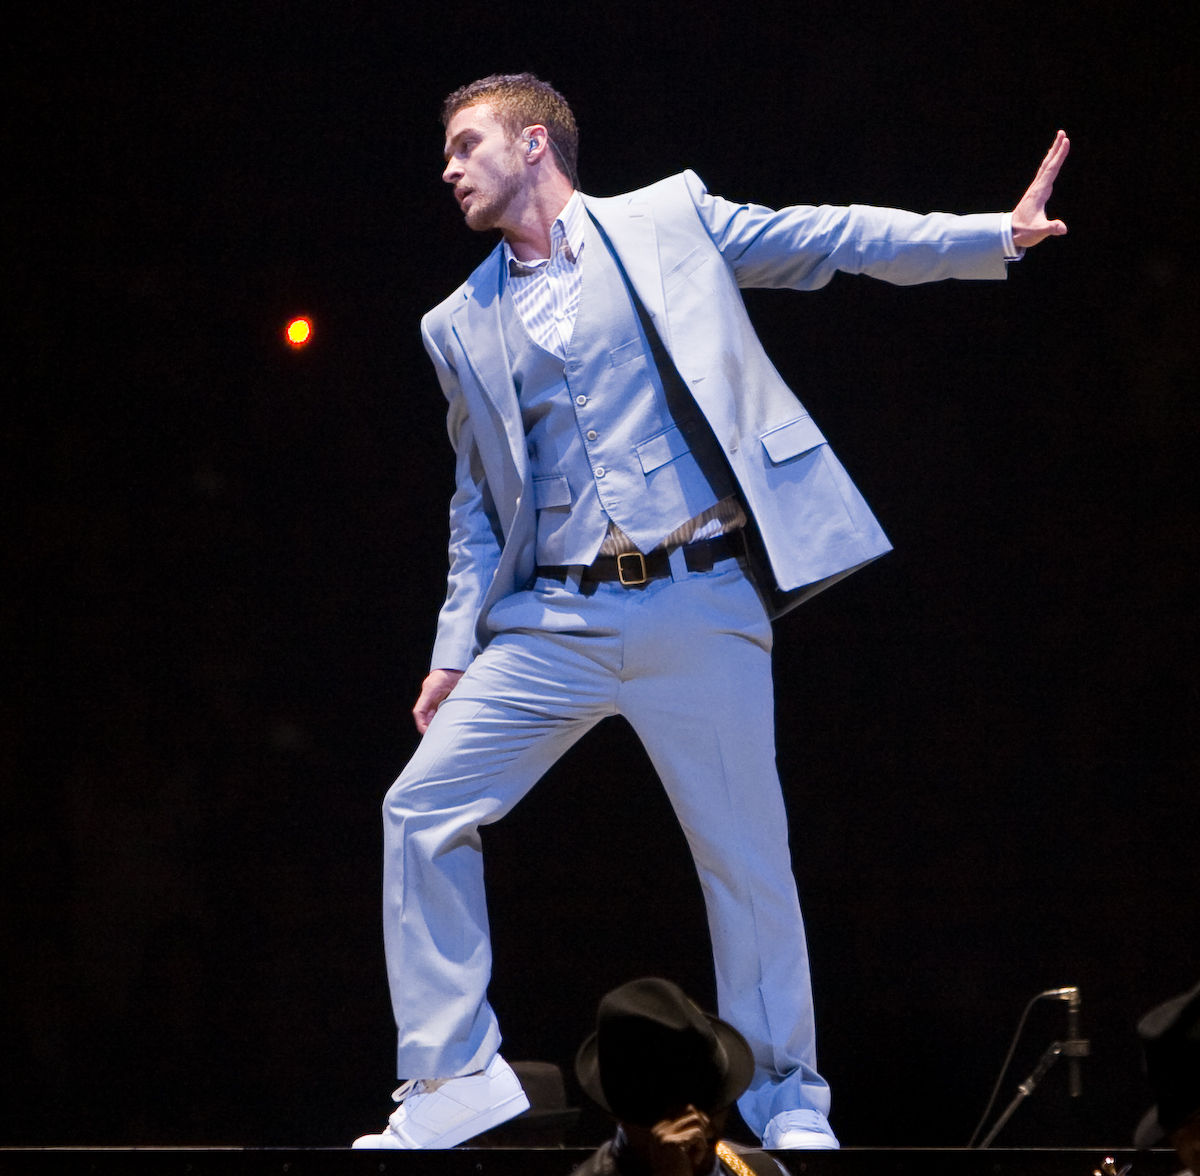 justin timberlake futuresex lovesounds album cover accident